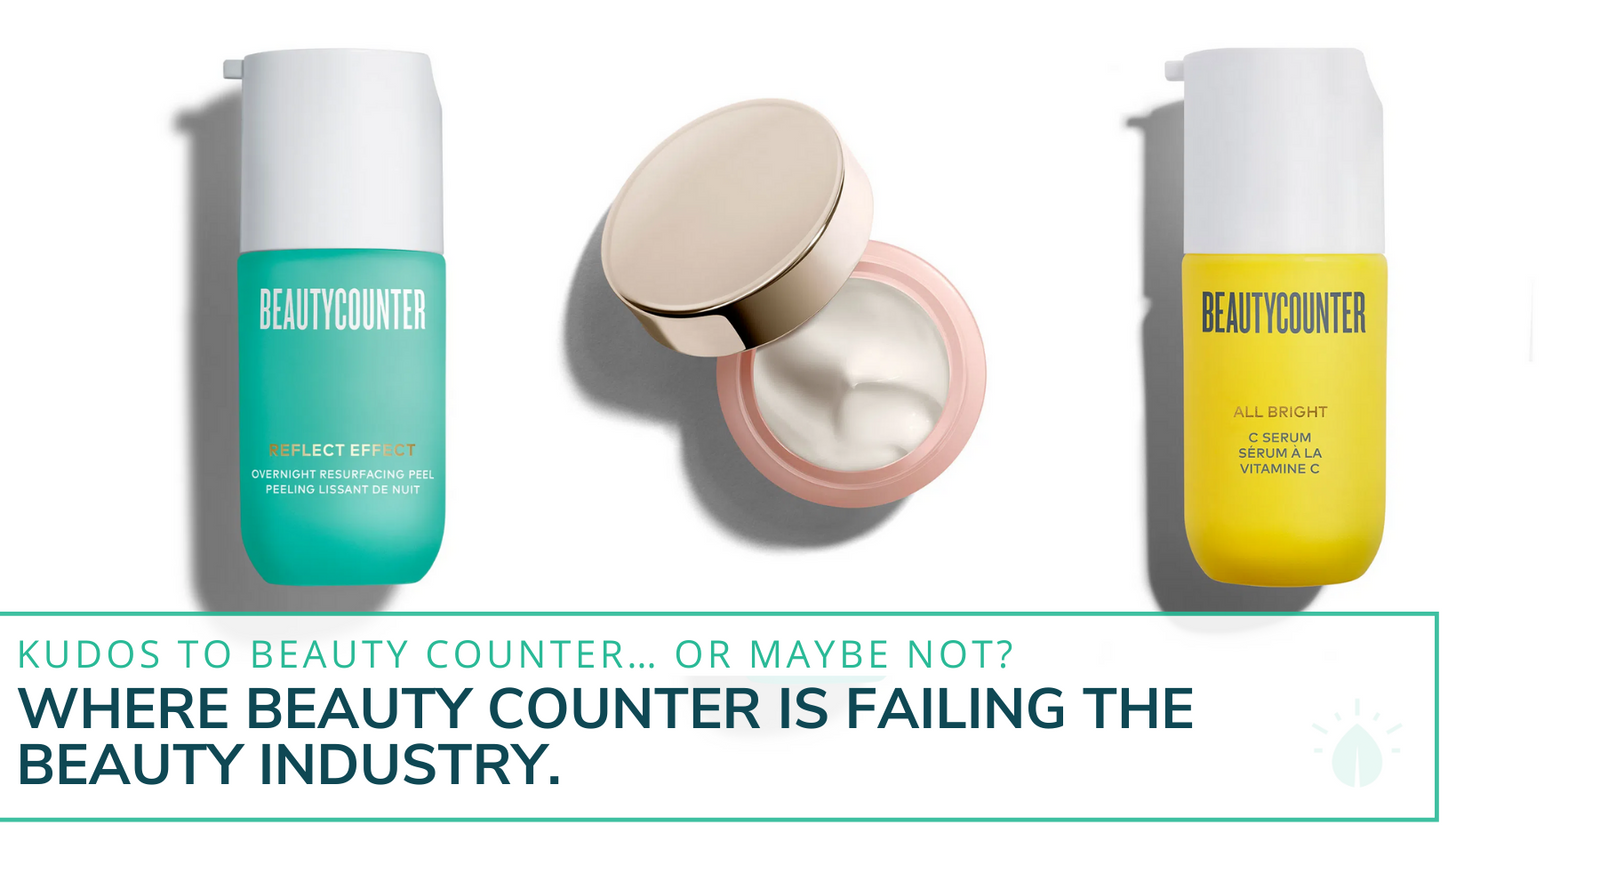 Kudos To Beauty Counter… Or Maybe Not? Where Beauty Counter Is Failing The Beauty Industry.